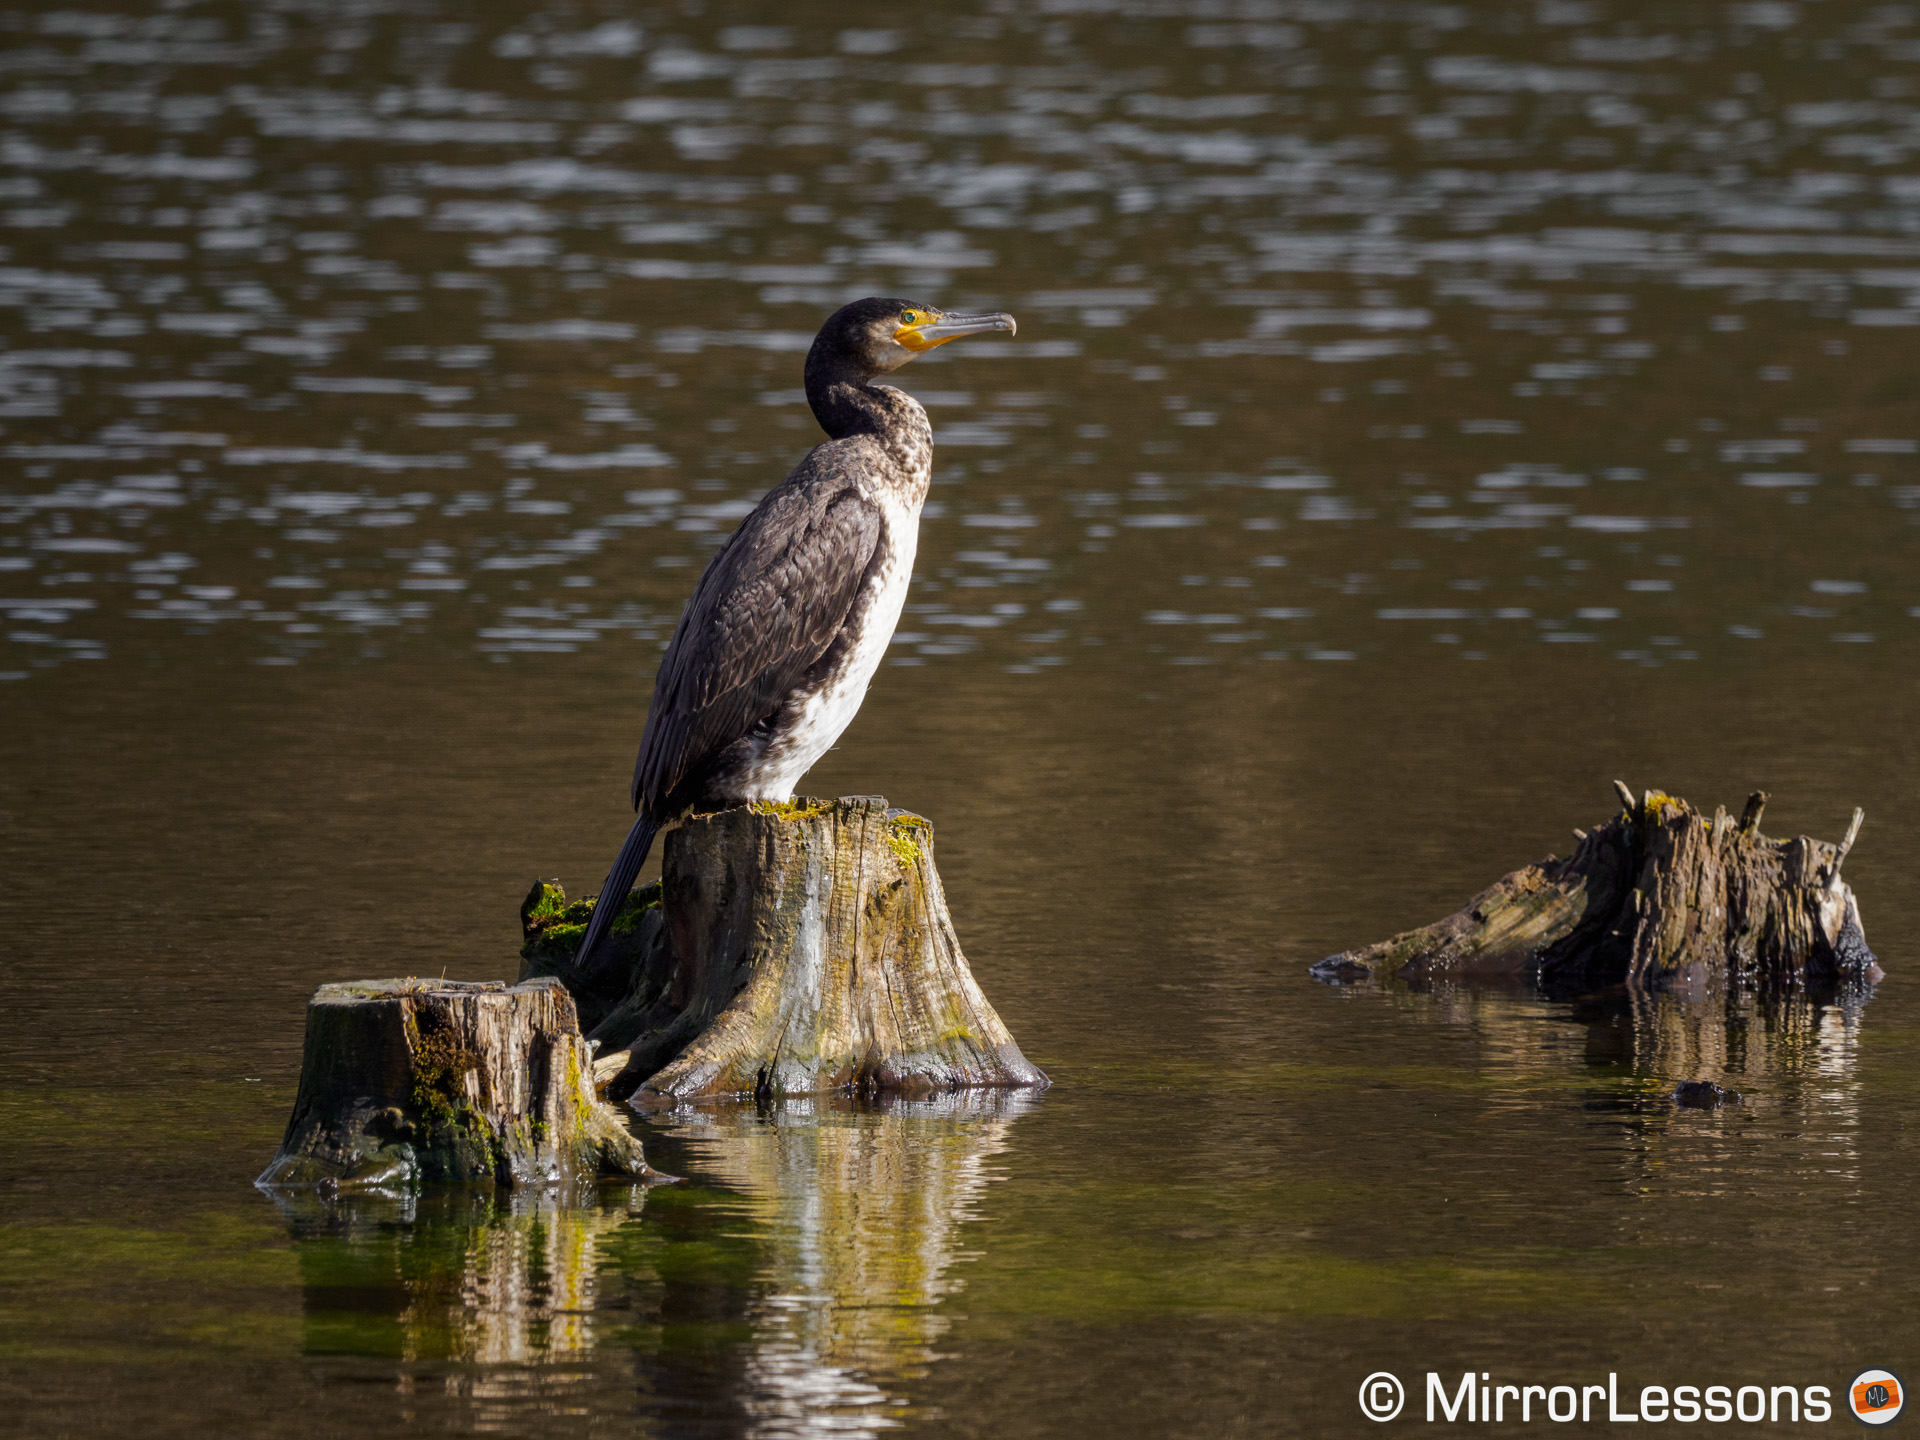 Cormoran resting on a log above water